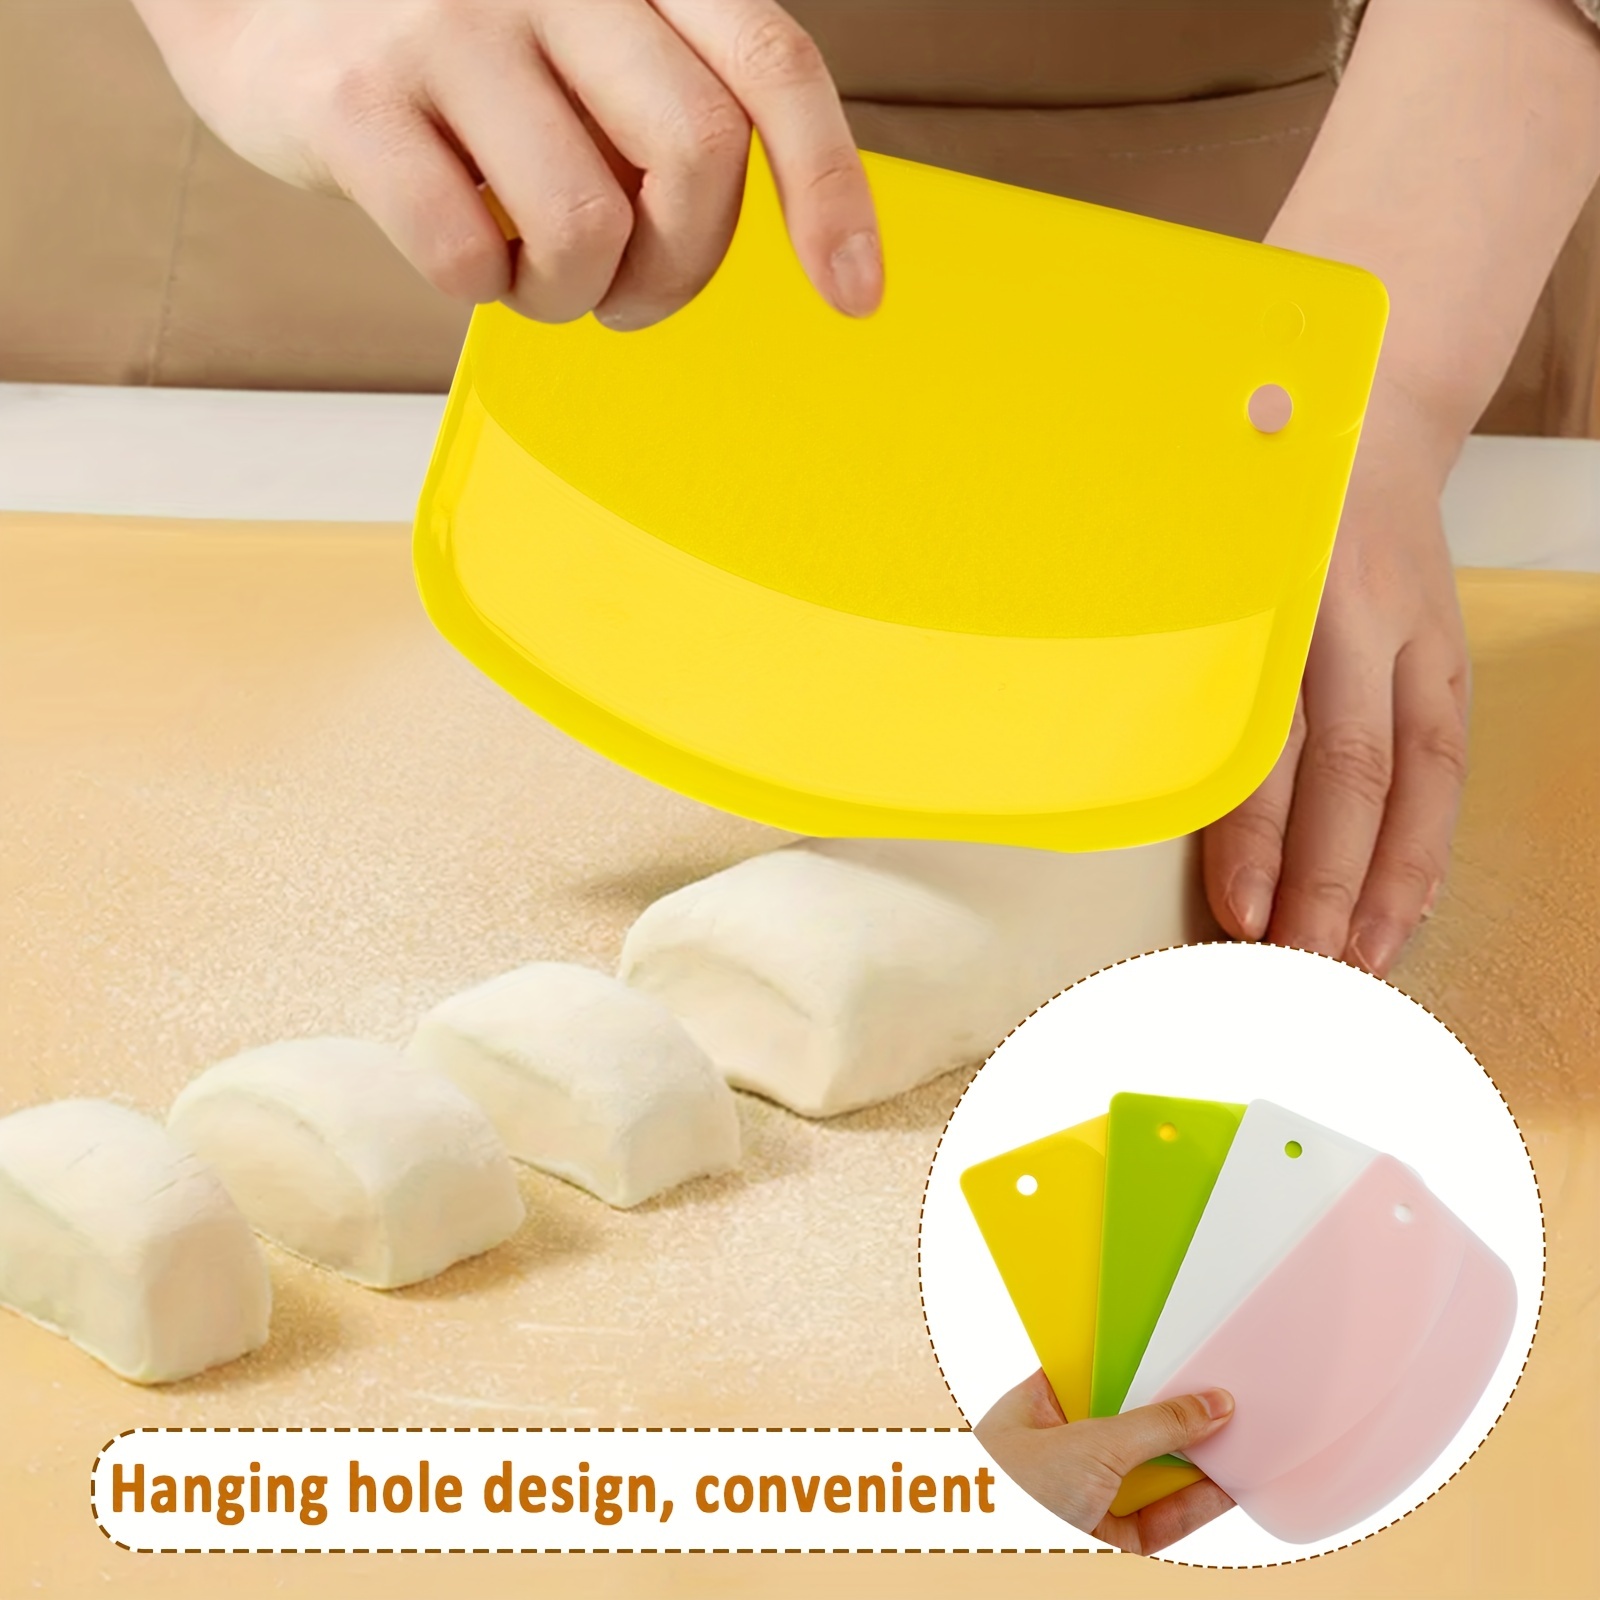 Spring Chef Stainless Steel Dough Blender and Bench Scraper Set